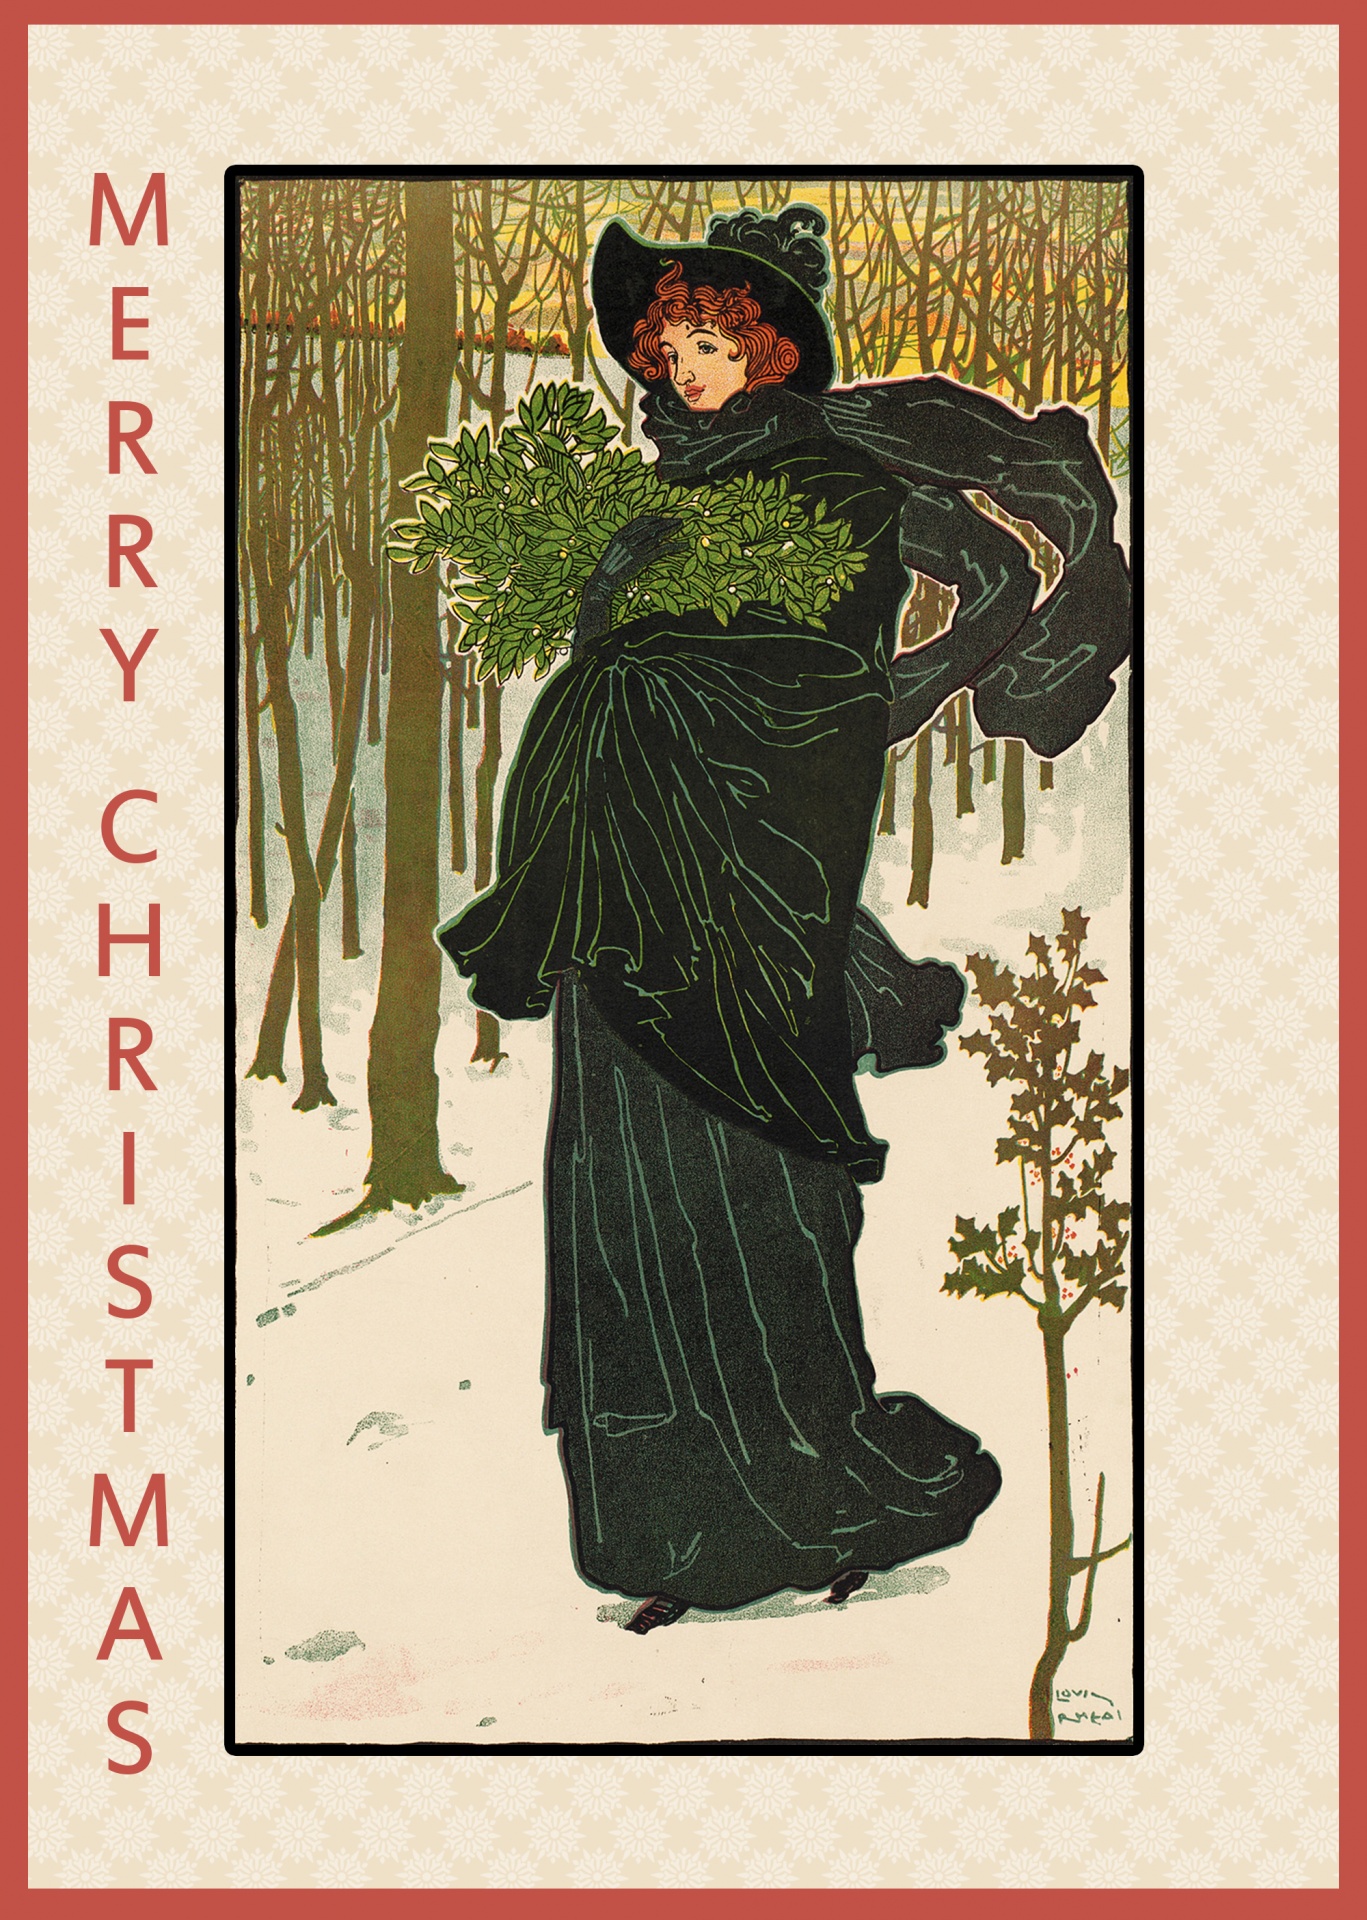 Vintage art nouveaux christmas card with woman holding mistletoe on aged snowflake pattern background and typography